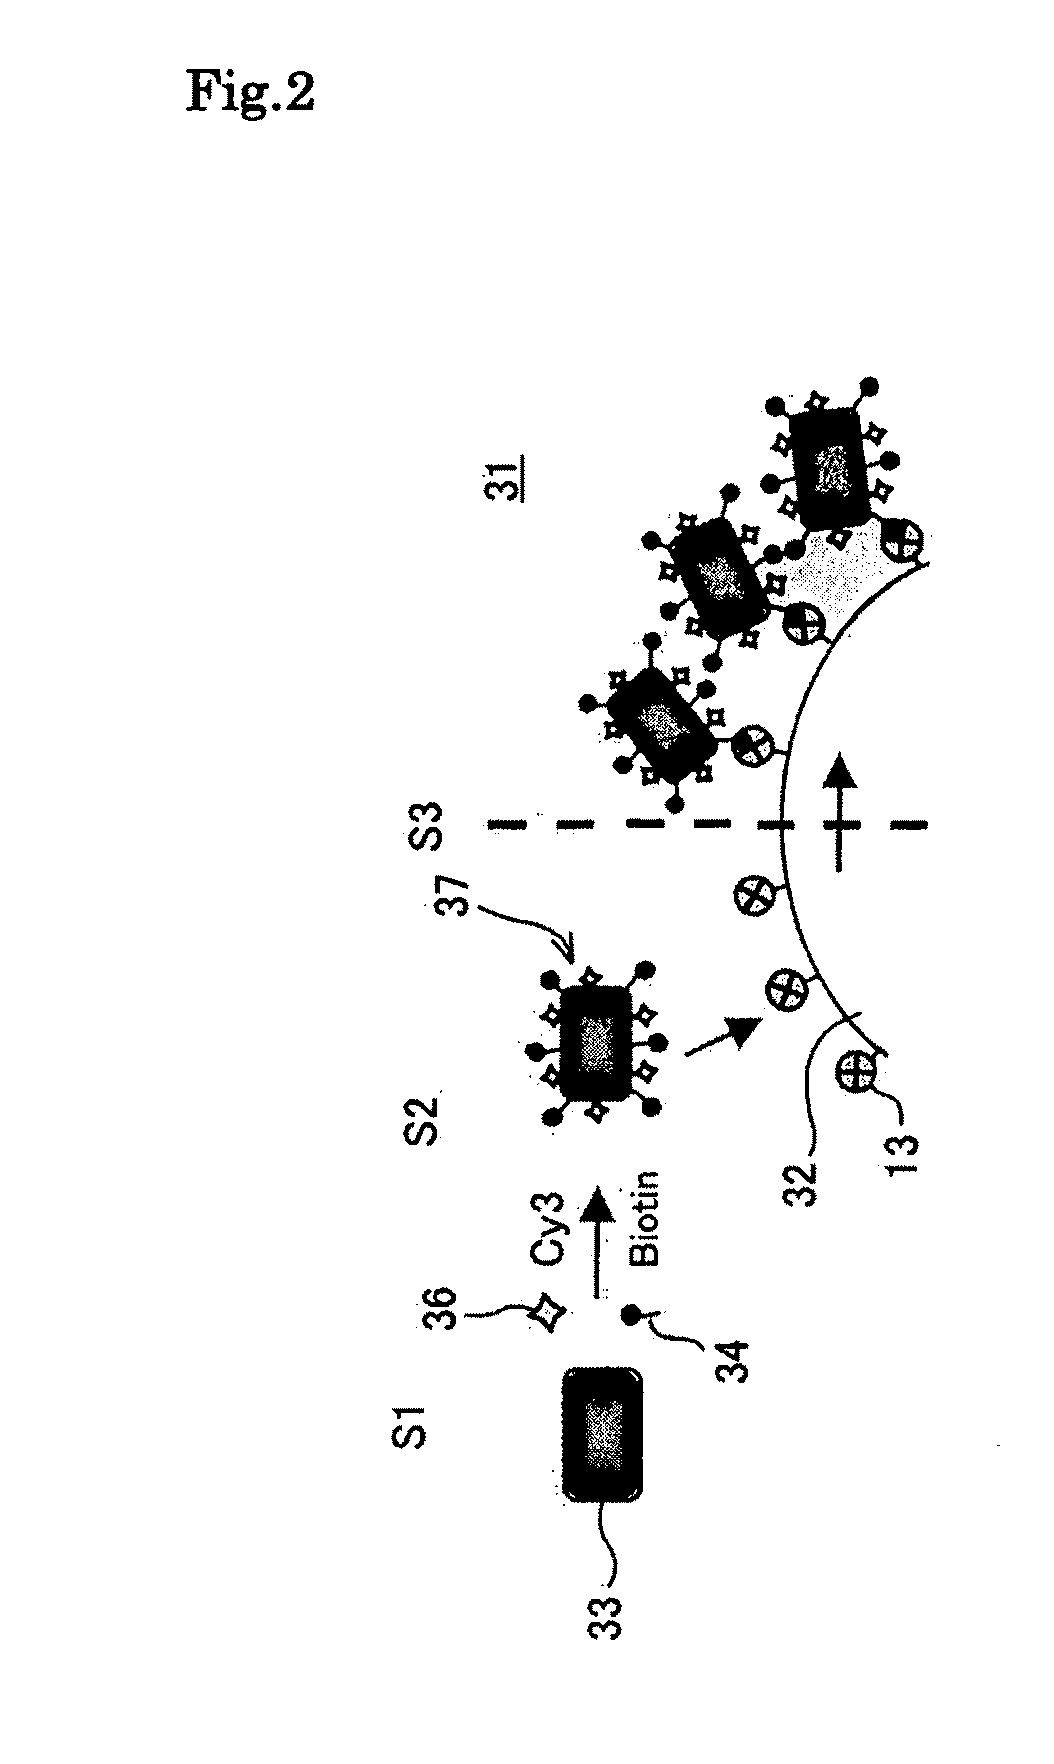 Magnetic particle holding carrier and method for preparing the same